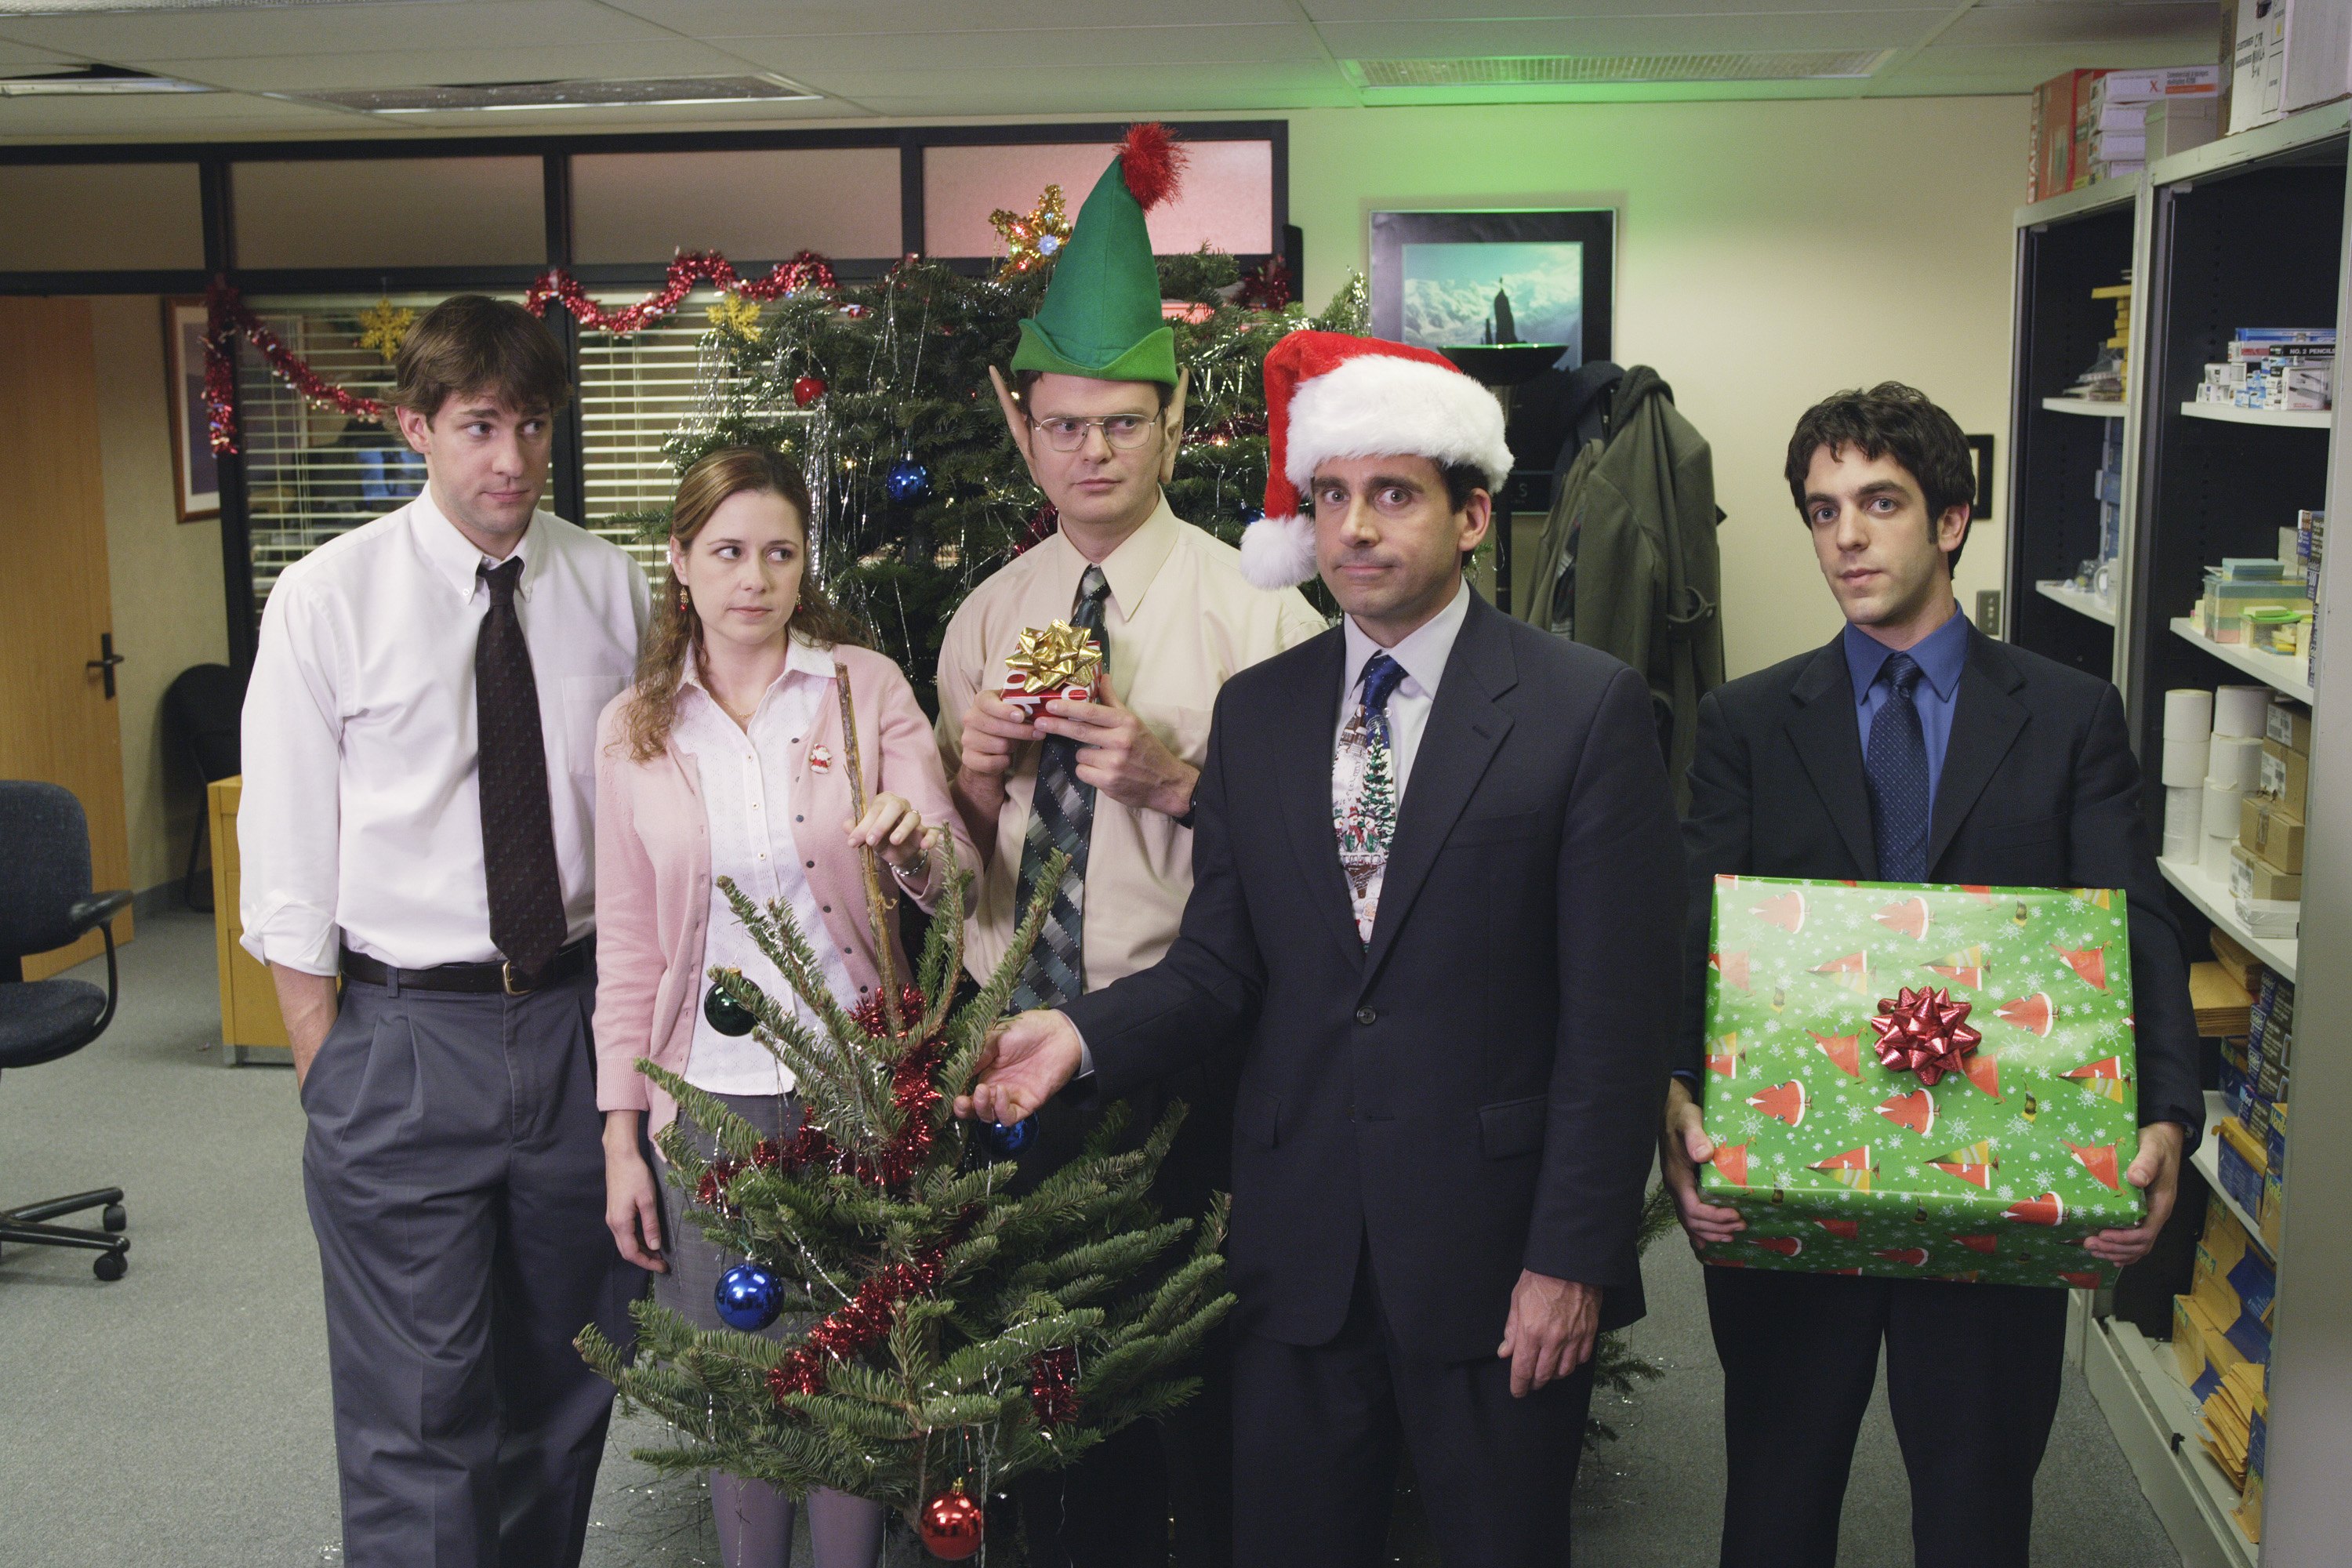 One third of office workers regret their holiday party